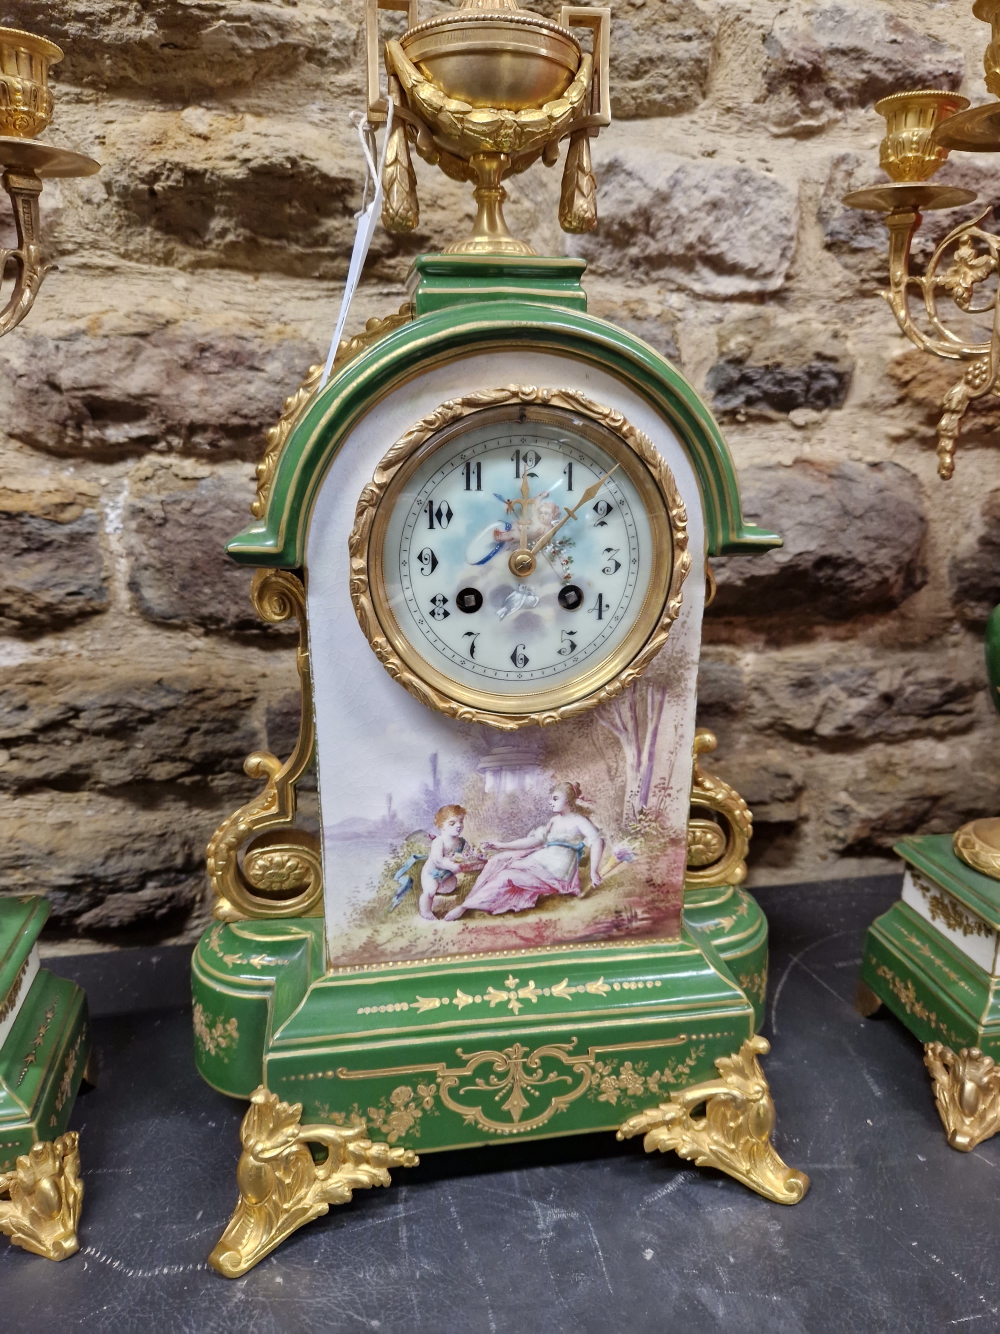 A LATE 19th/EARLY 20th C. FRENCH APPLE GREEN AND GILT PORCELAIN CLOCK GARNITURE, THE CLOCK WITH - Image 4 of 8